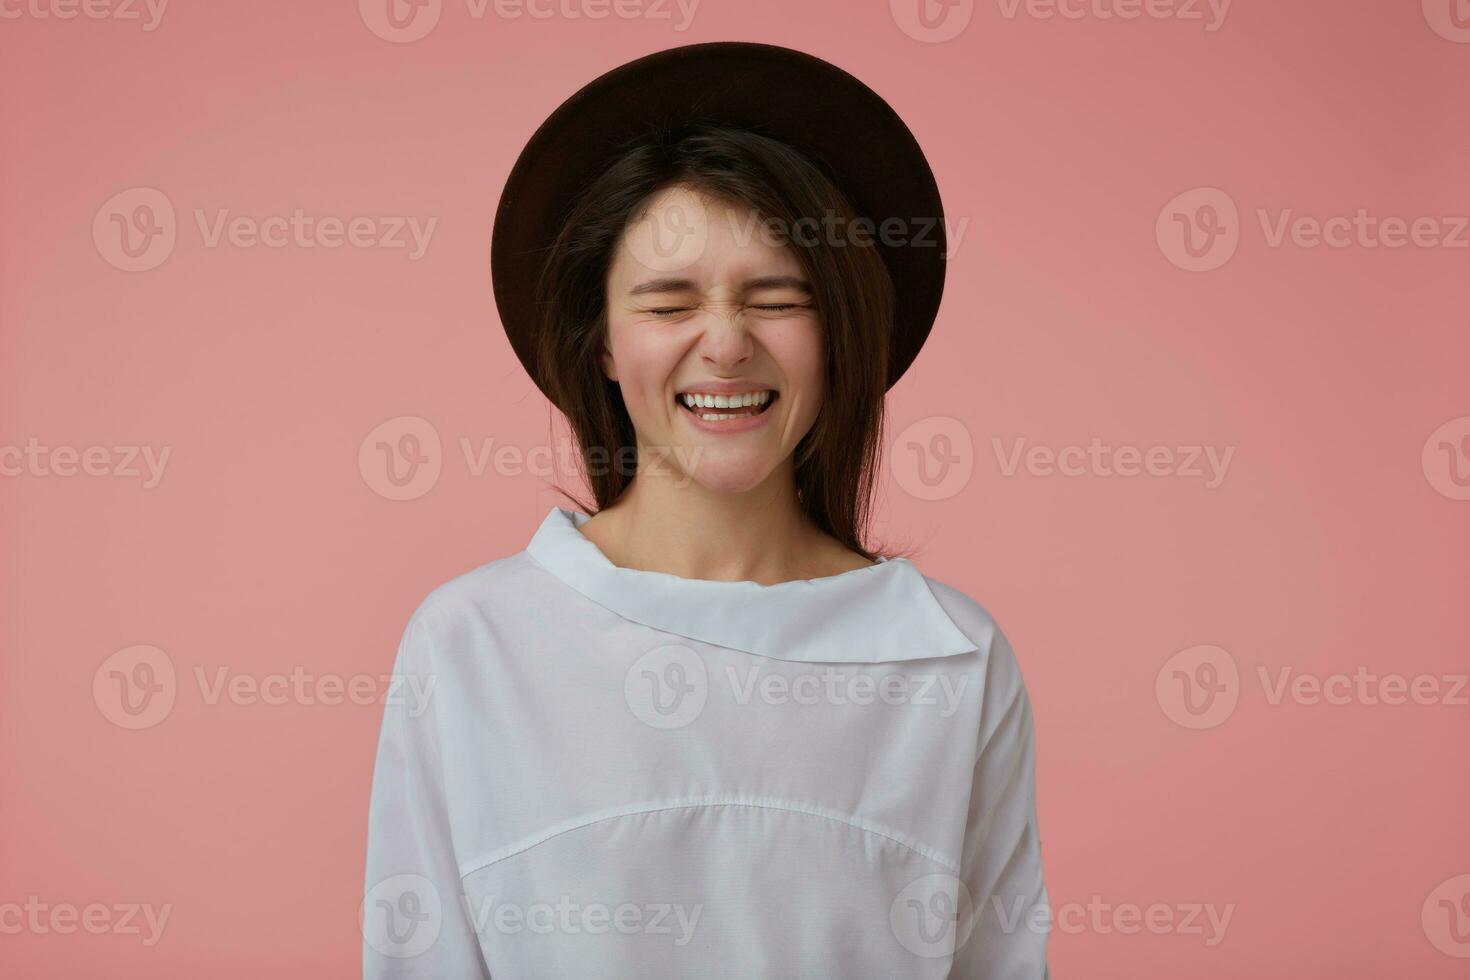 Teenage girl, happy looking woman with long brunette hair. Wearing white blouse and black hat. Laughing and keep eyes closed. Emotional concept. Stand isolated over pastel pink background photo